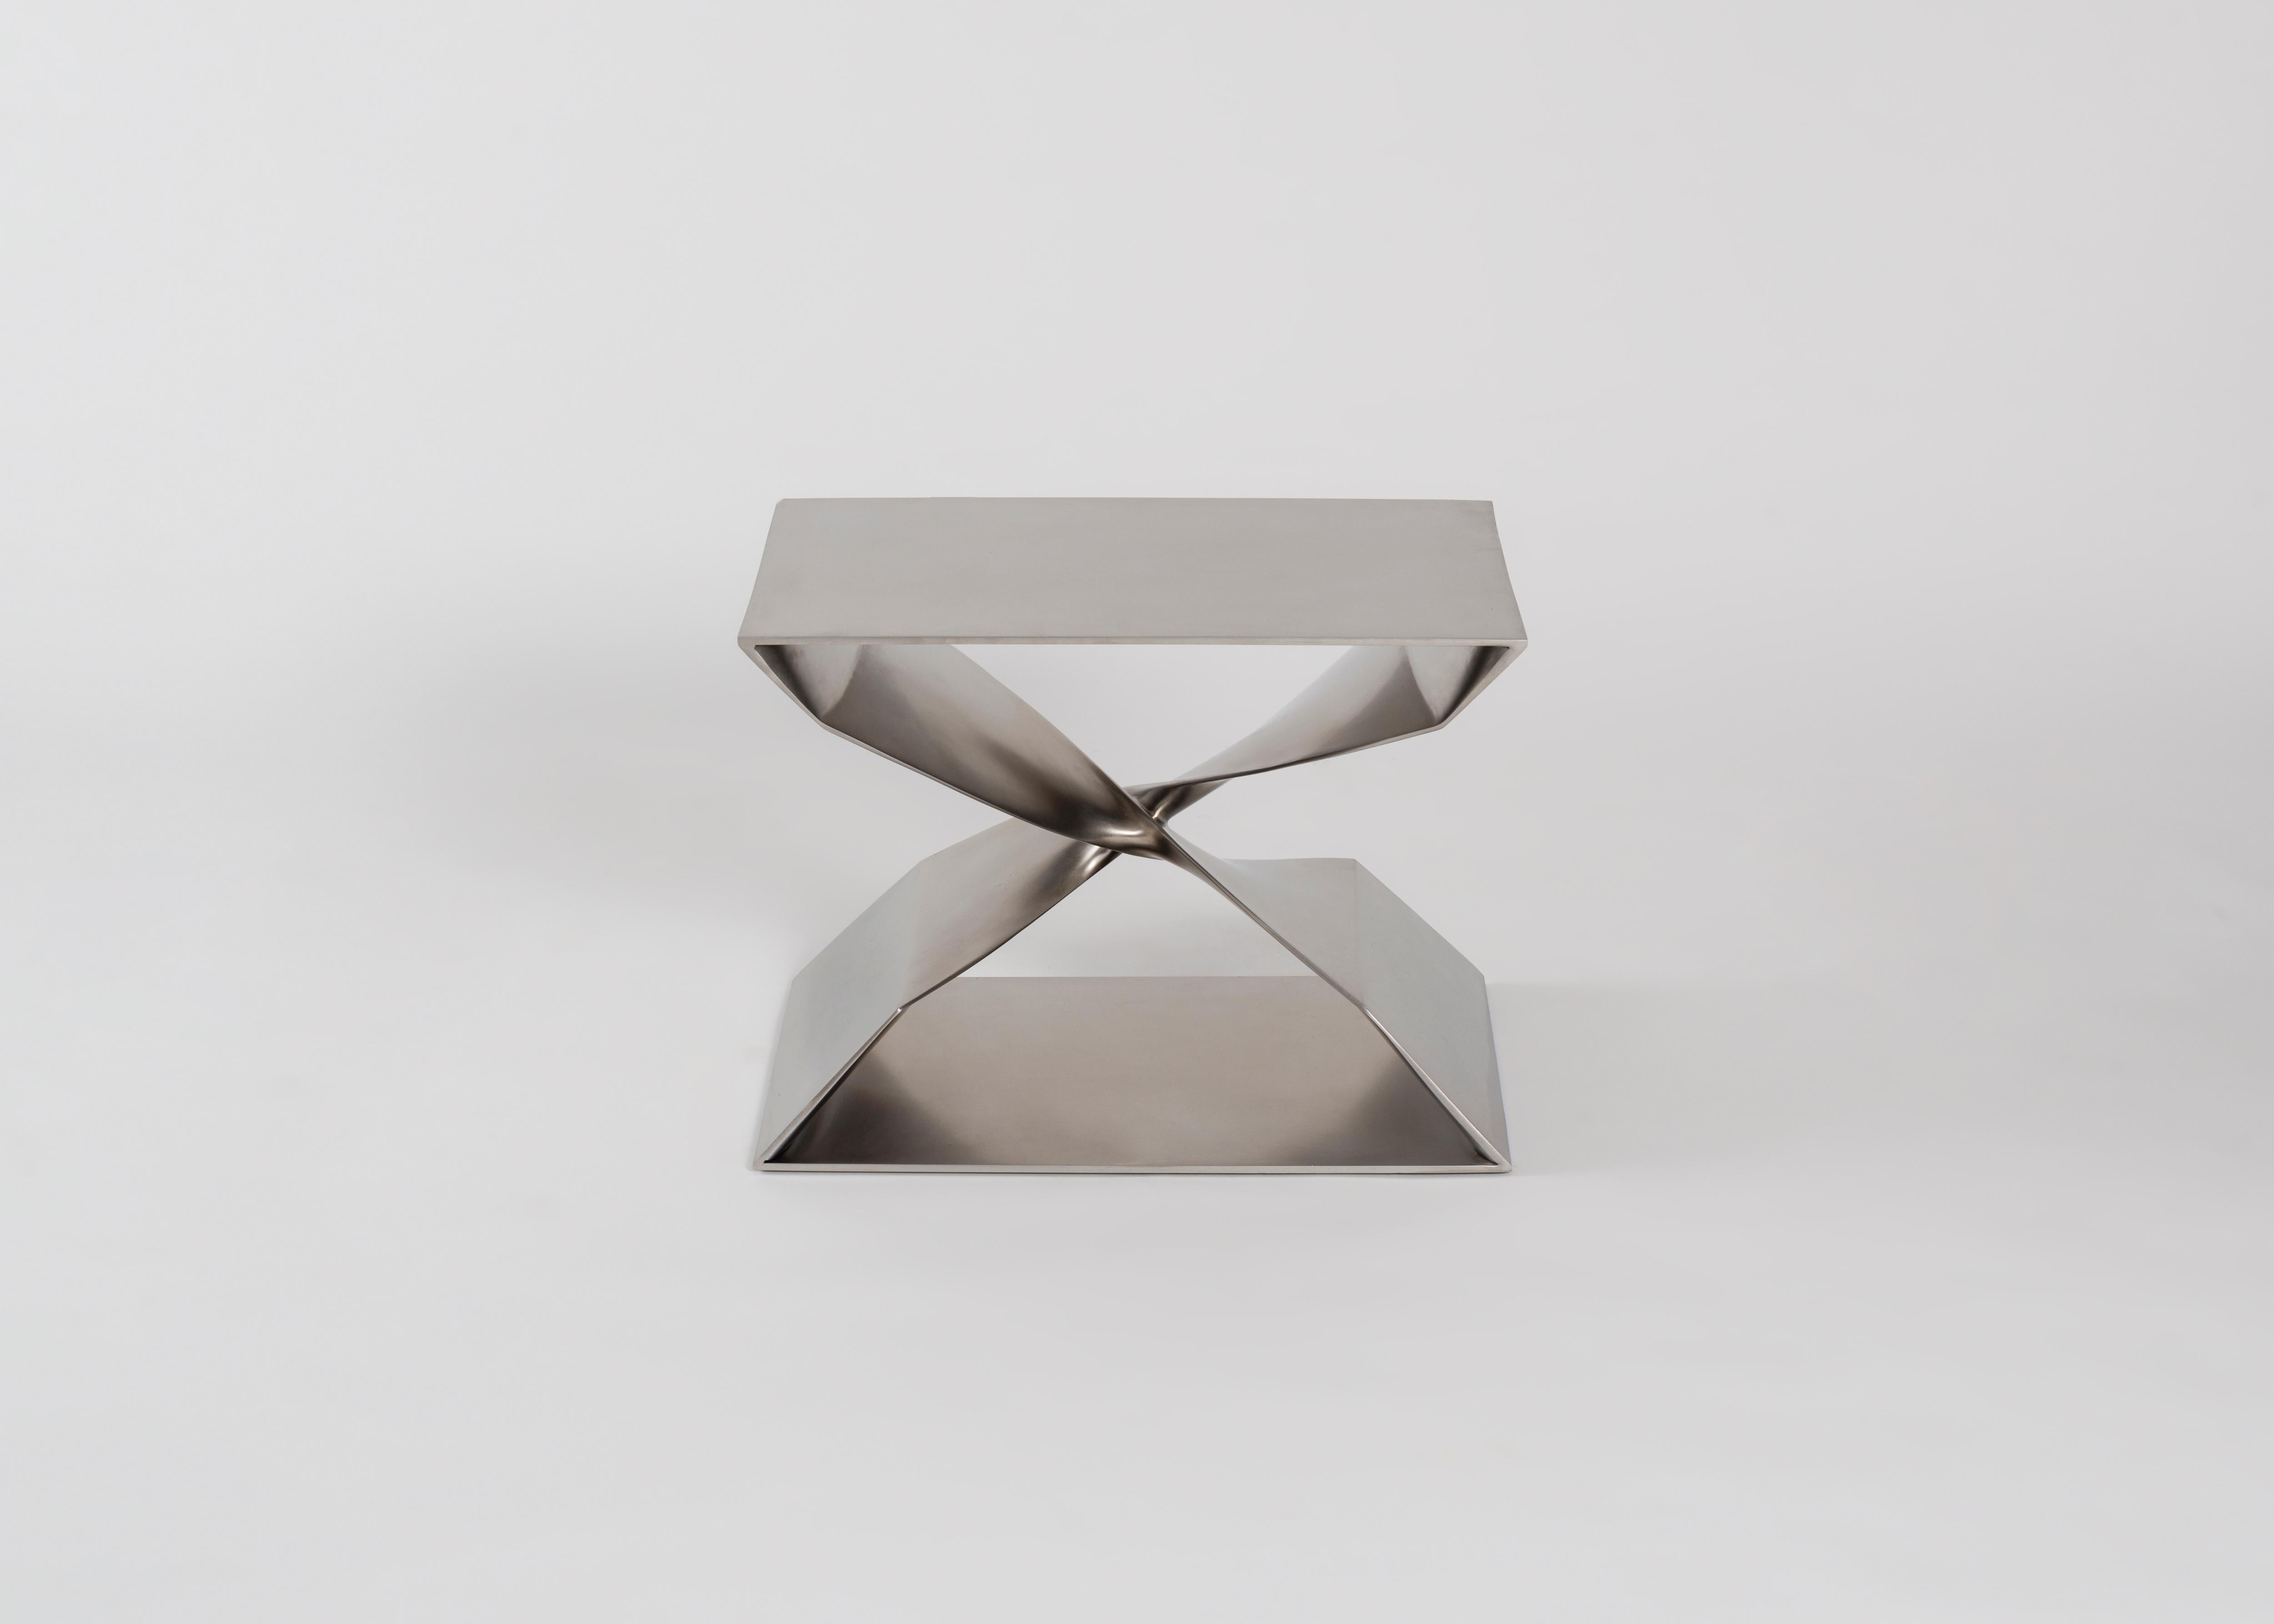 Sculptural brushed stainless steel stool by Carol Egan.

This sculptural stool is part of a line of contemporary furniture designed by blending digital technology with fine traditional craftsmanship. Cast in stainless steel, the stool features two